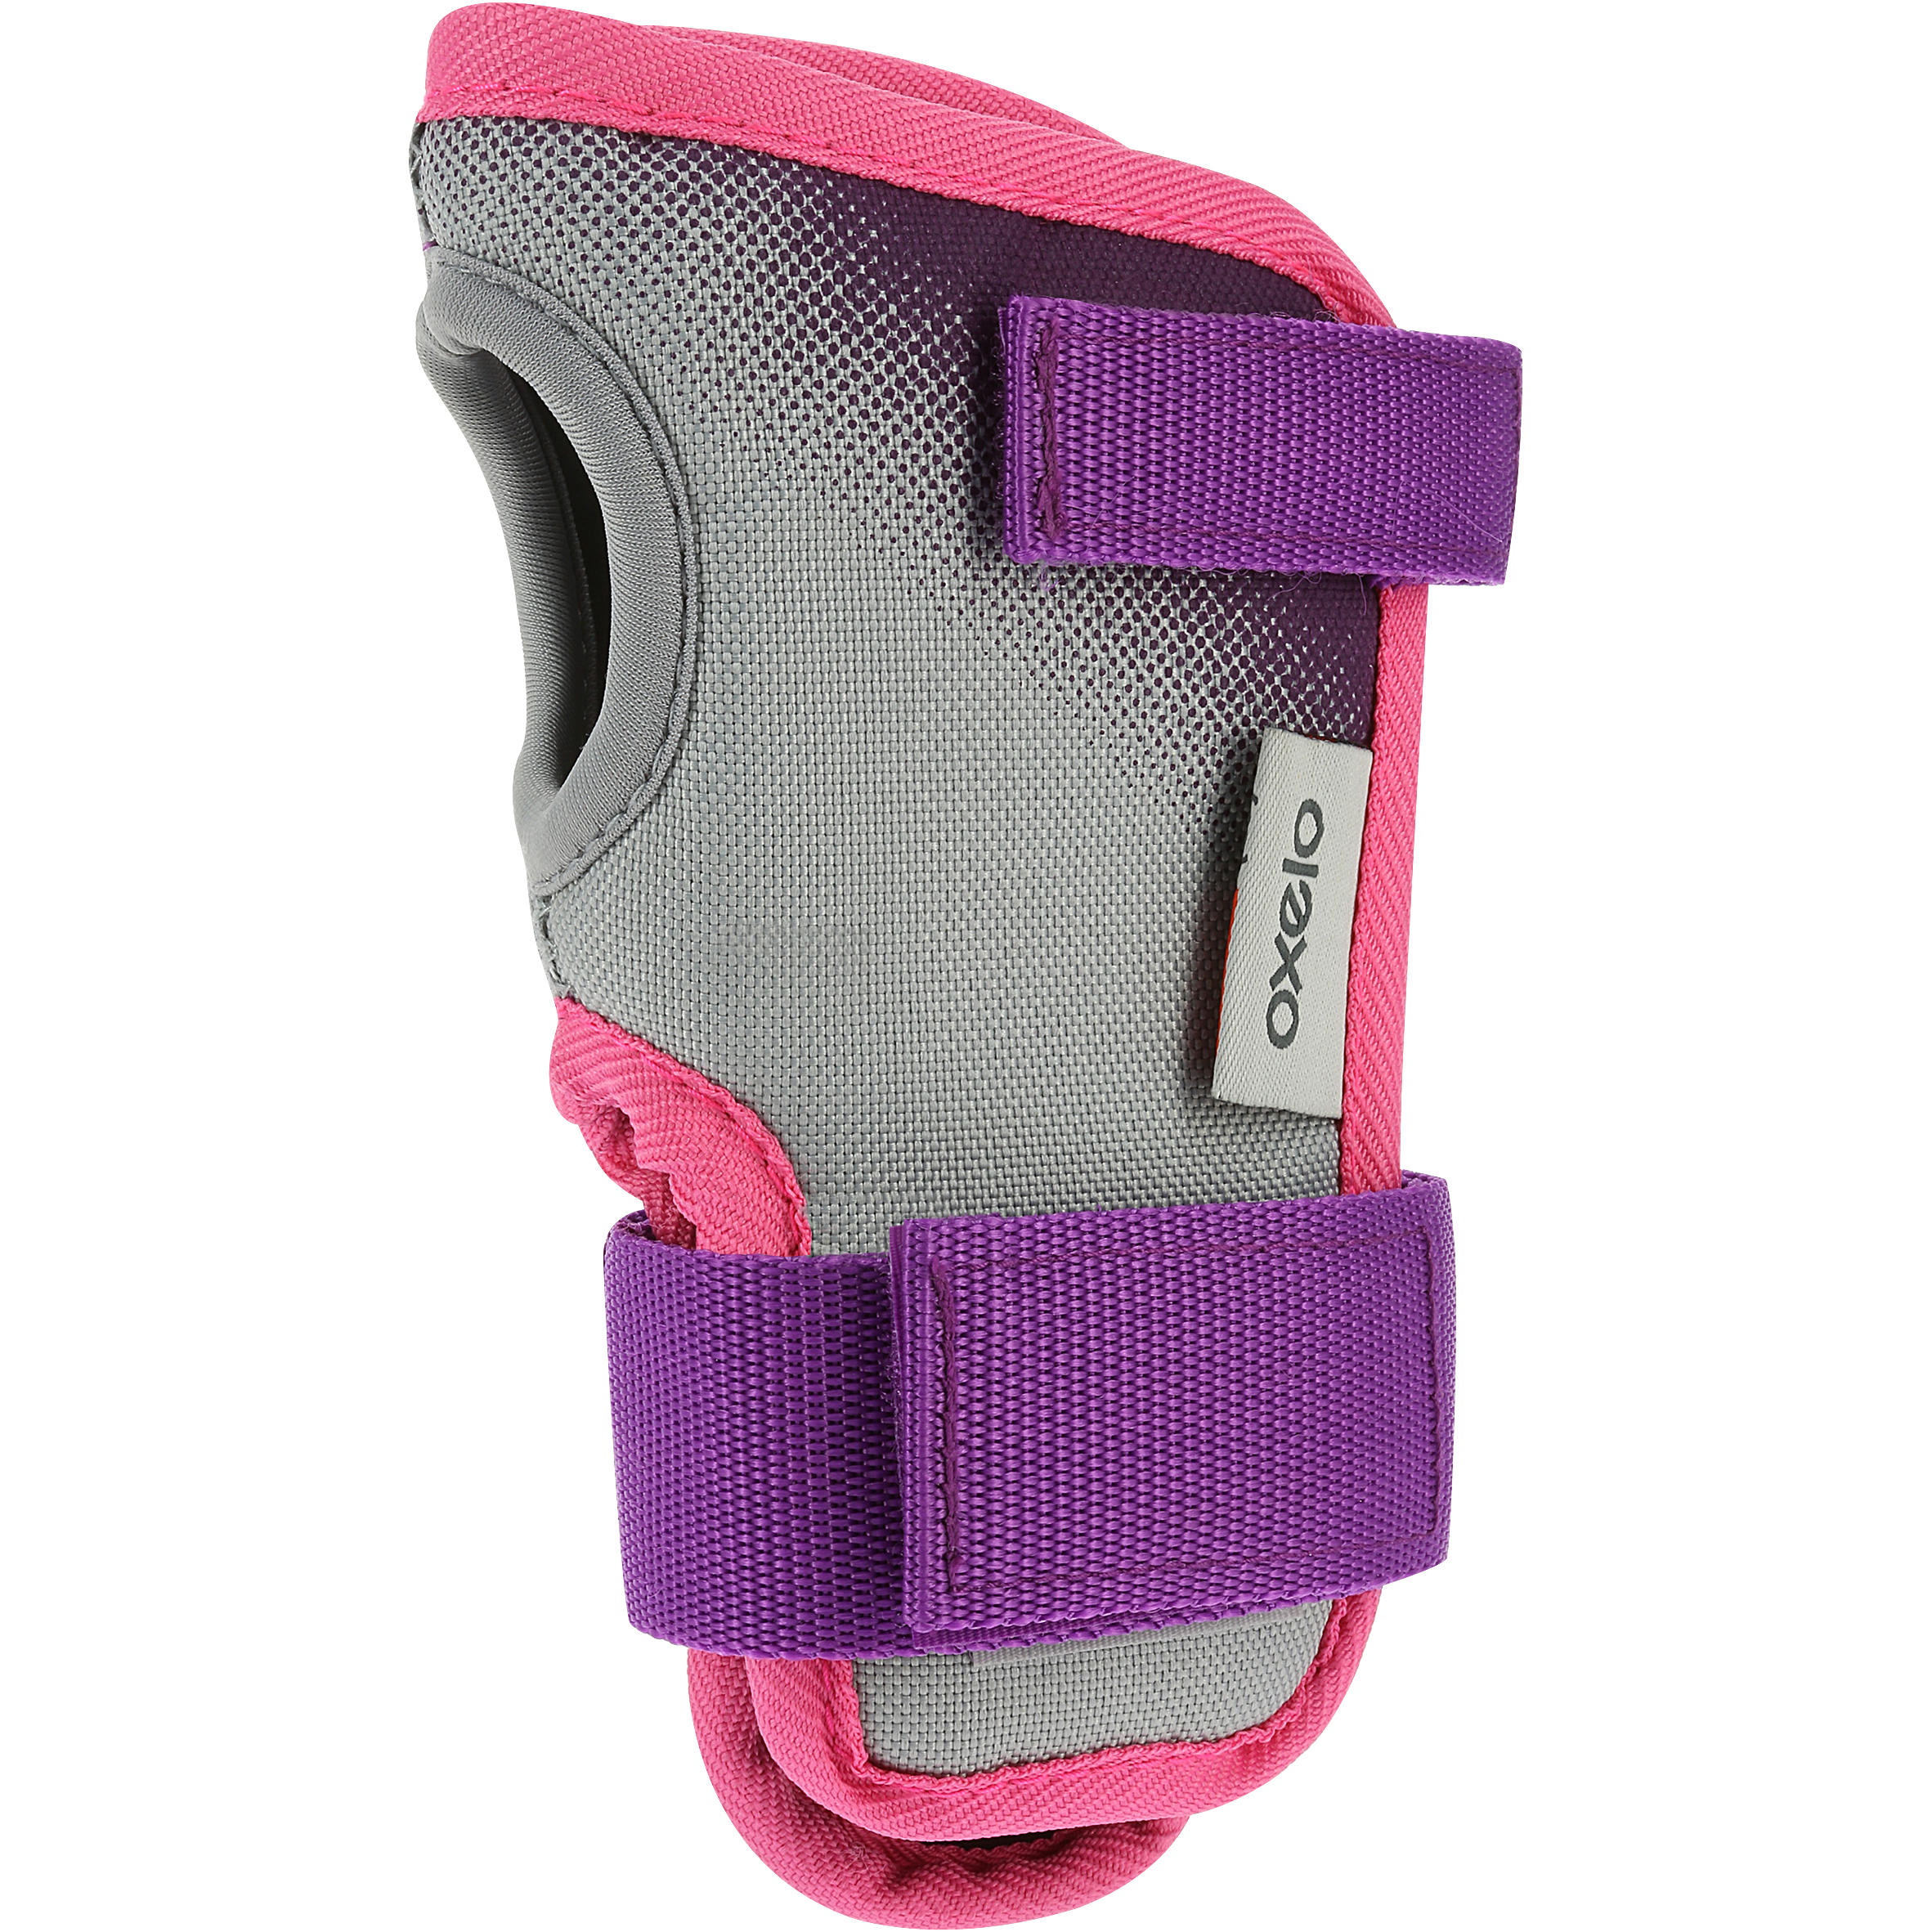 Play Kids' 3-Piece Skating Skateboarding Scooter Protective Gear - Purple 5/9